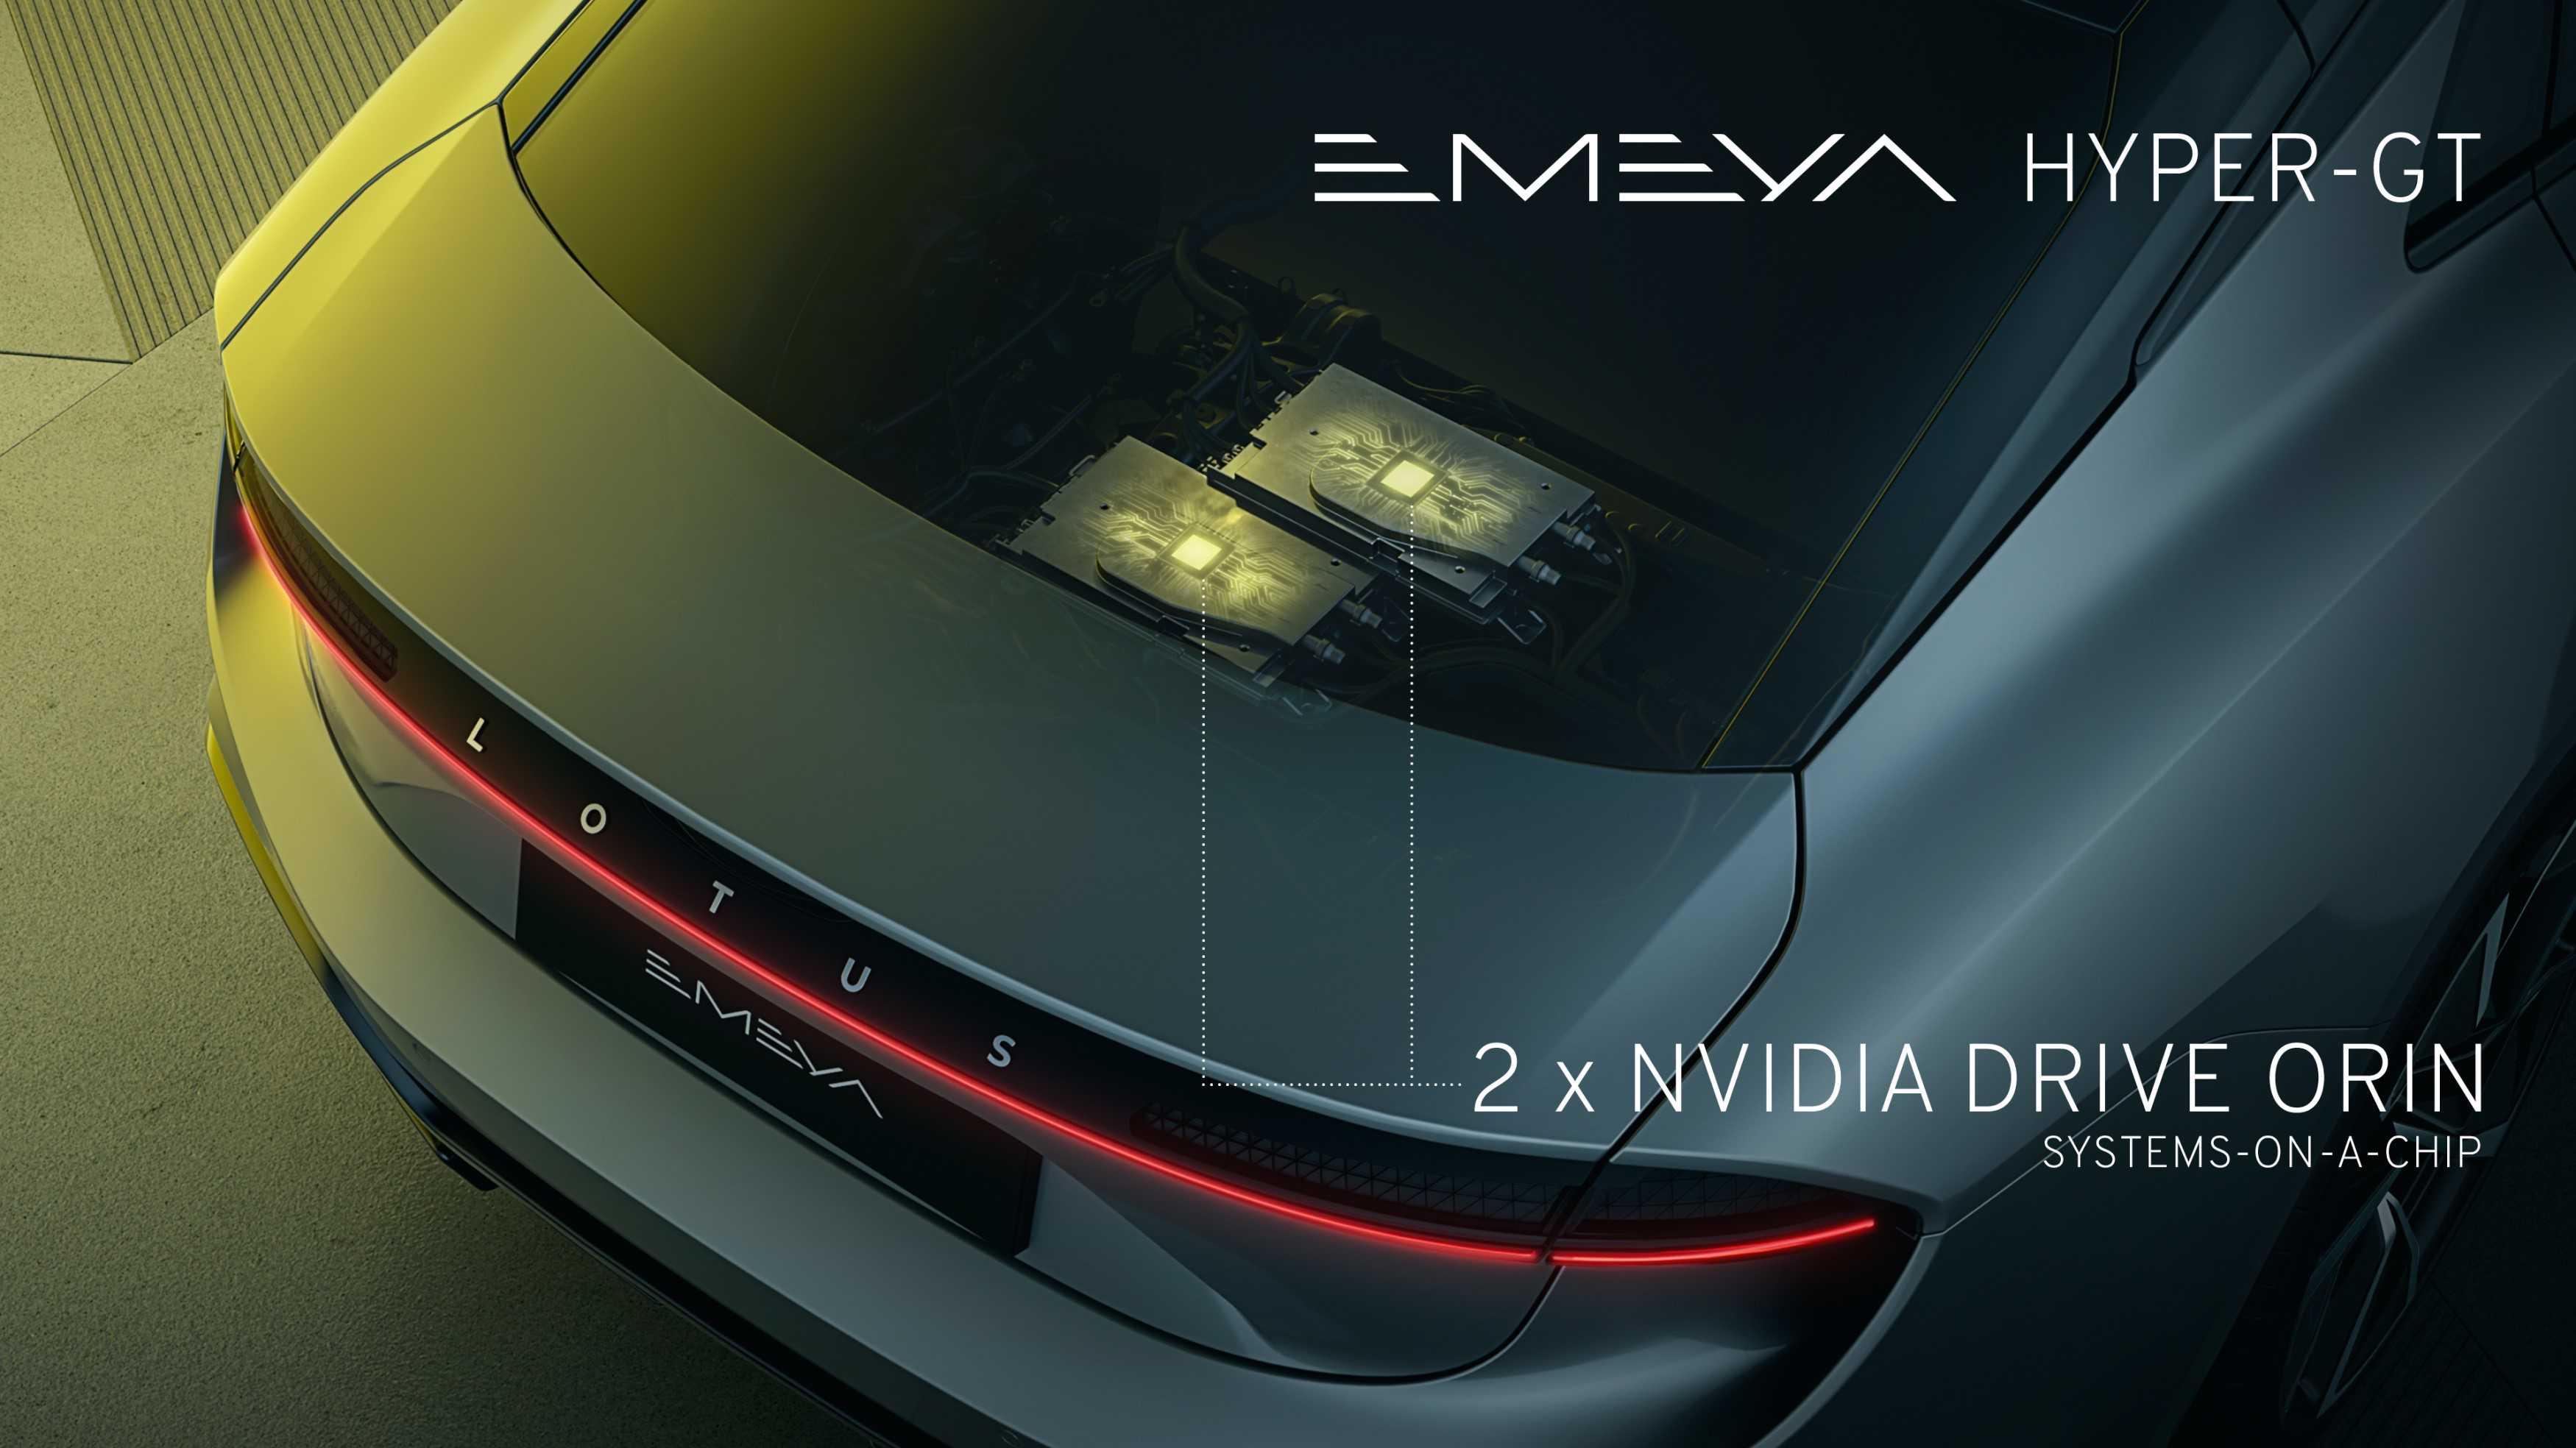 Lotus believes processing power is the new horsepower – and Emeya built on NVIDIA DRIVE is a thoroughbred